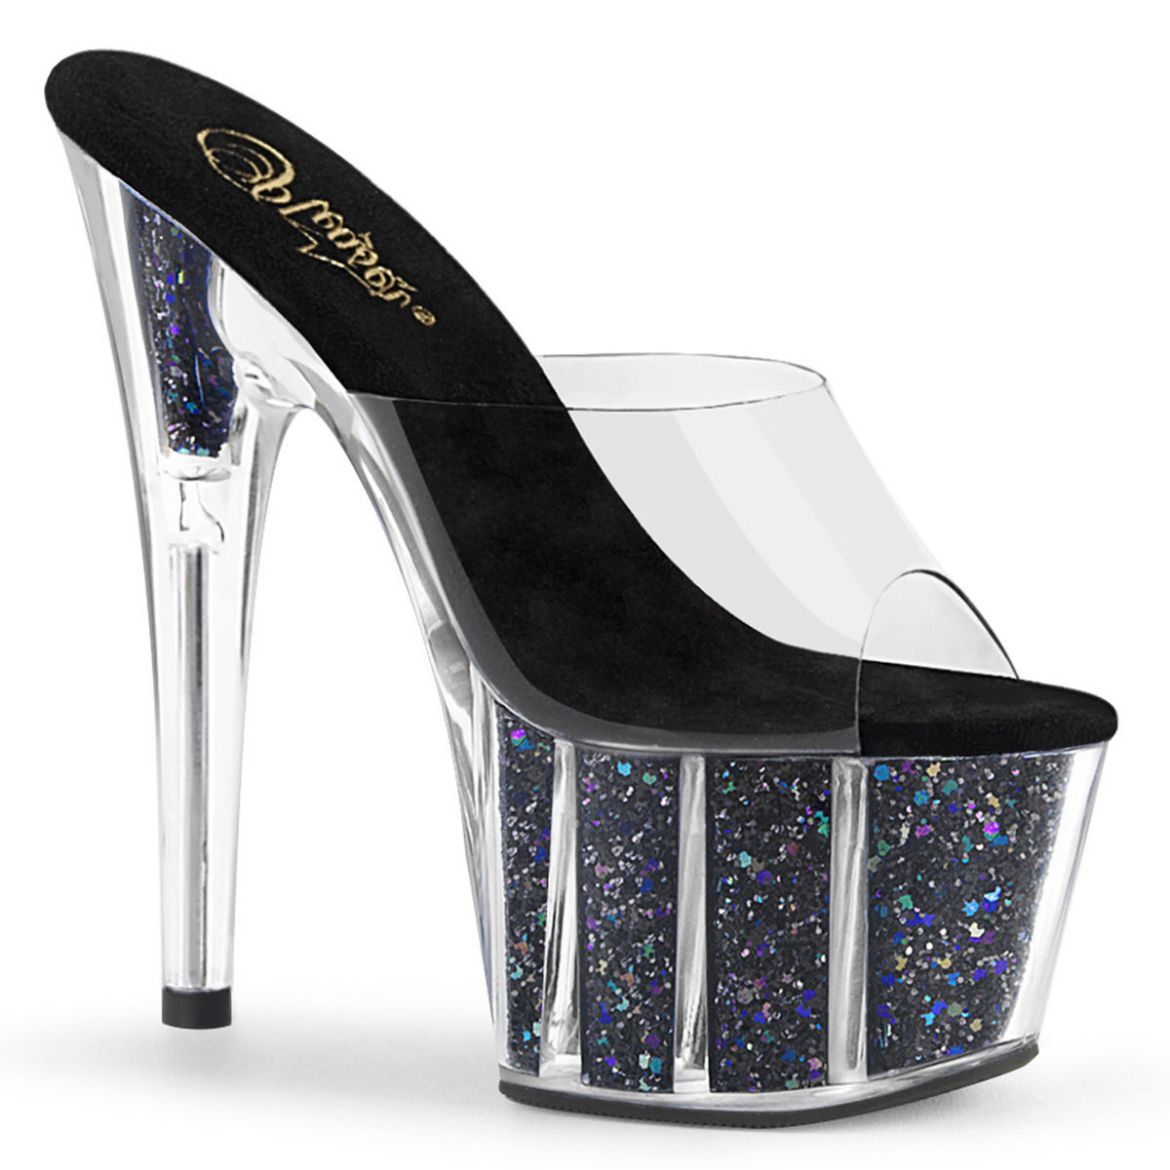 Product image of Pleaser ADORE-701CG Clear/Black Confetti Glitter 7 inch (17.8 cm) Heel 2 3/4 inch (7 cm) Platform Slide With  Glitter Inserts Slide Mule Shoes